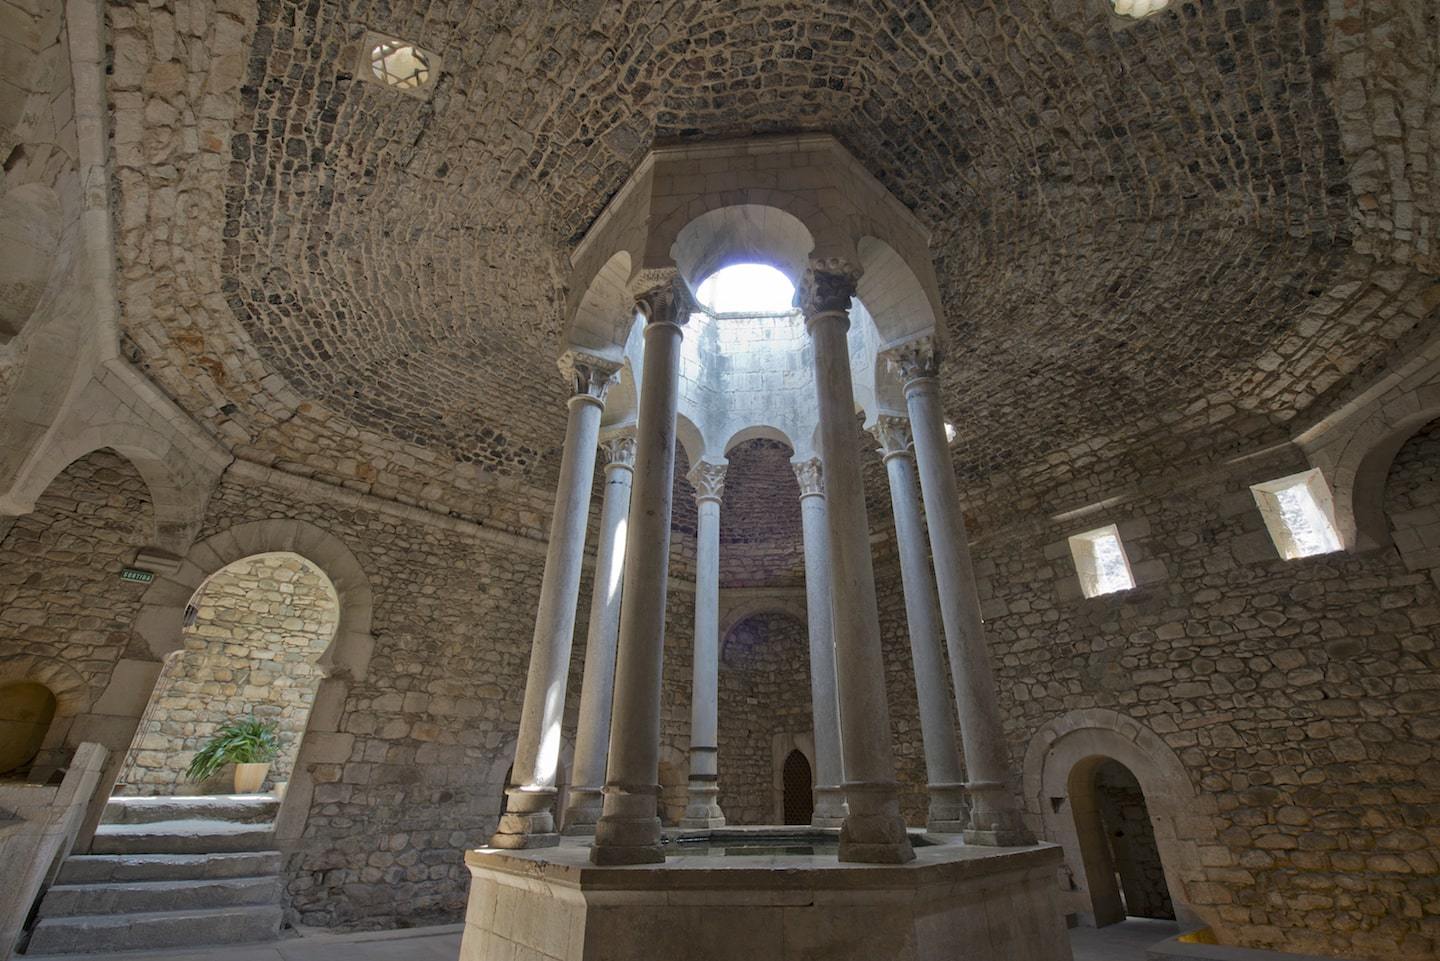 stone bath house with columns and light shining through